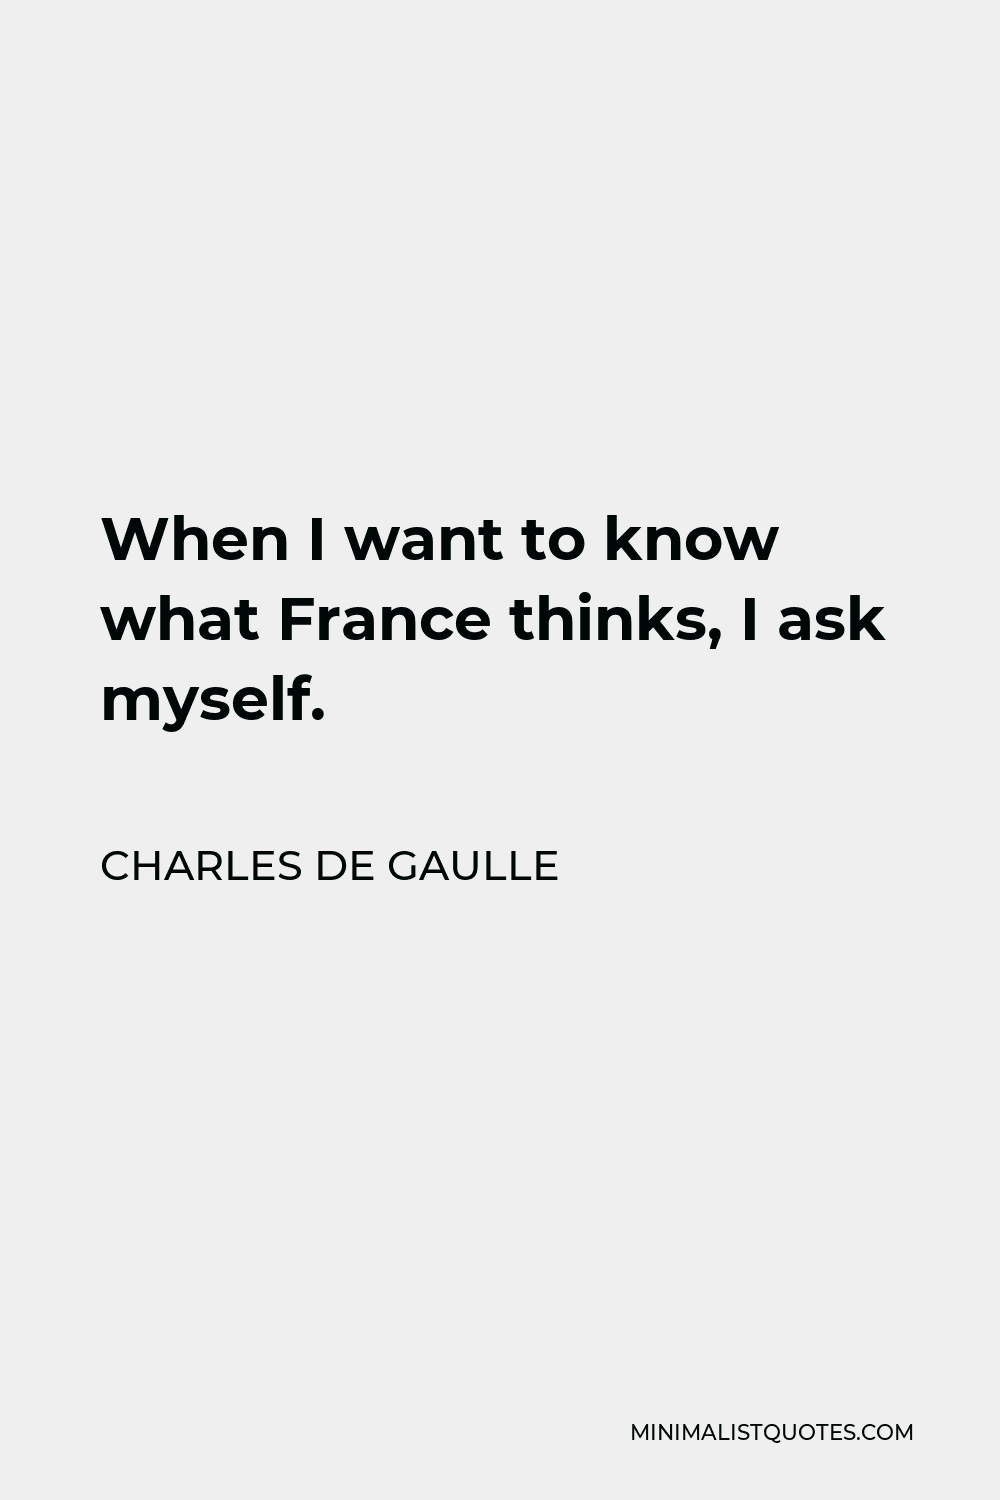 Charles de Gaulle Quote - When I want to know what France thinks, I ask myself.